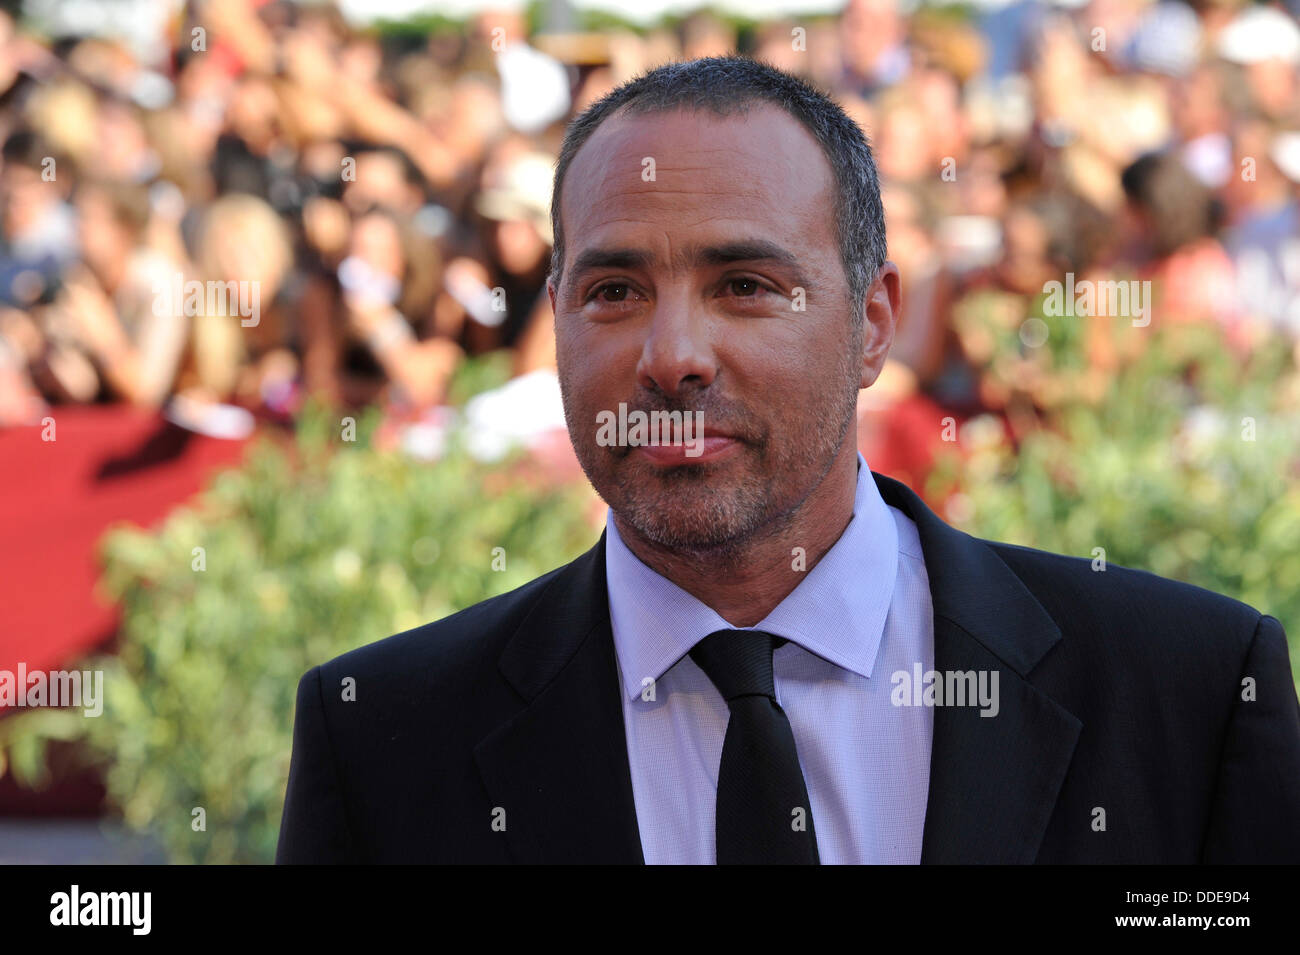 Director Peter Landesman attends the 'Parkland' Premiere during the 70th Venice International Film Festival at the Palazzo Del Cinema on September 1, 2013 in Venice, Italy. Stock Photo